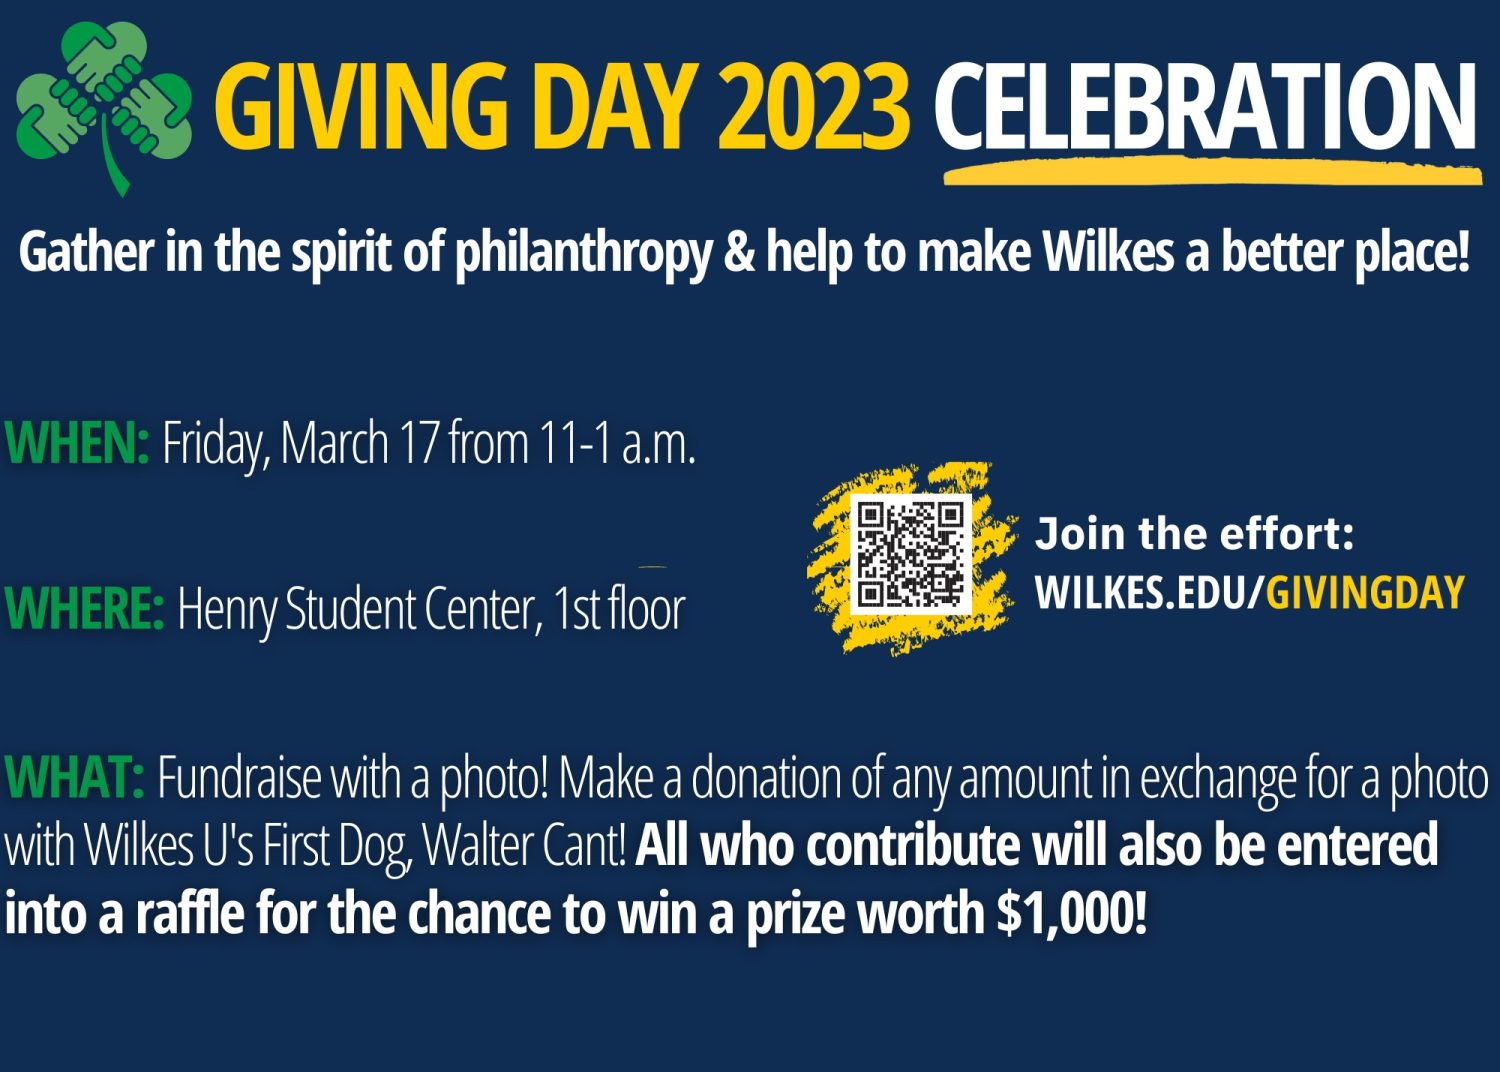 Giving Day event
11 a.m. to 1 p.m. on Friday, March 17 on the first floor of the Henry Student Center